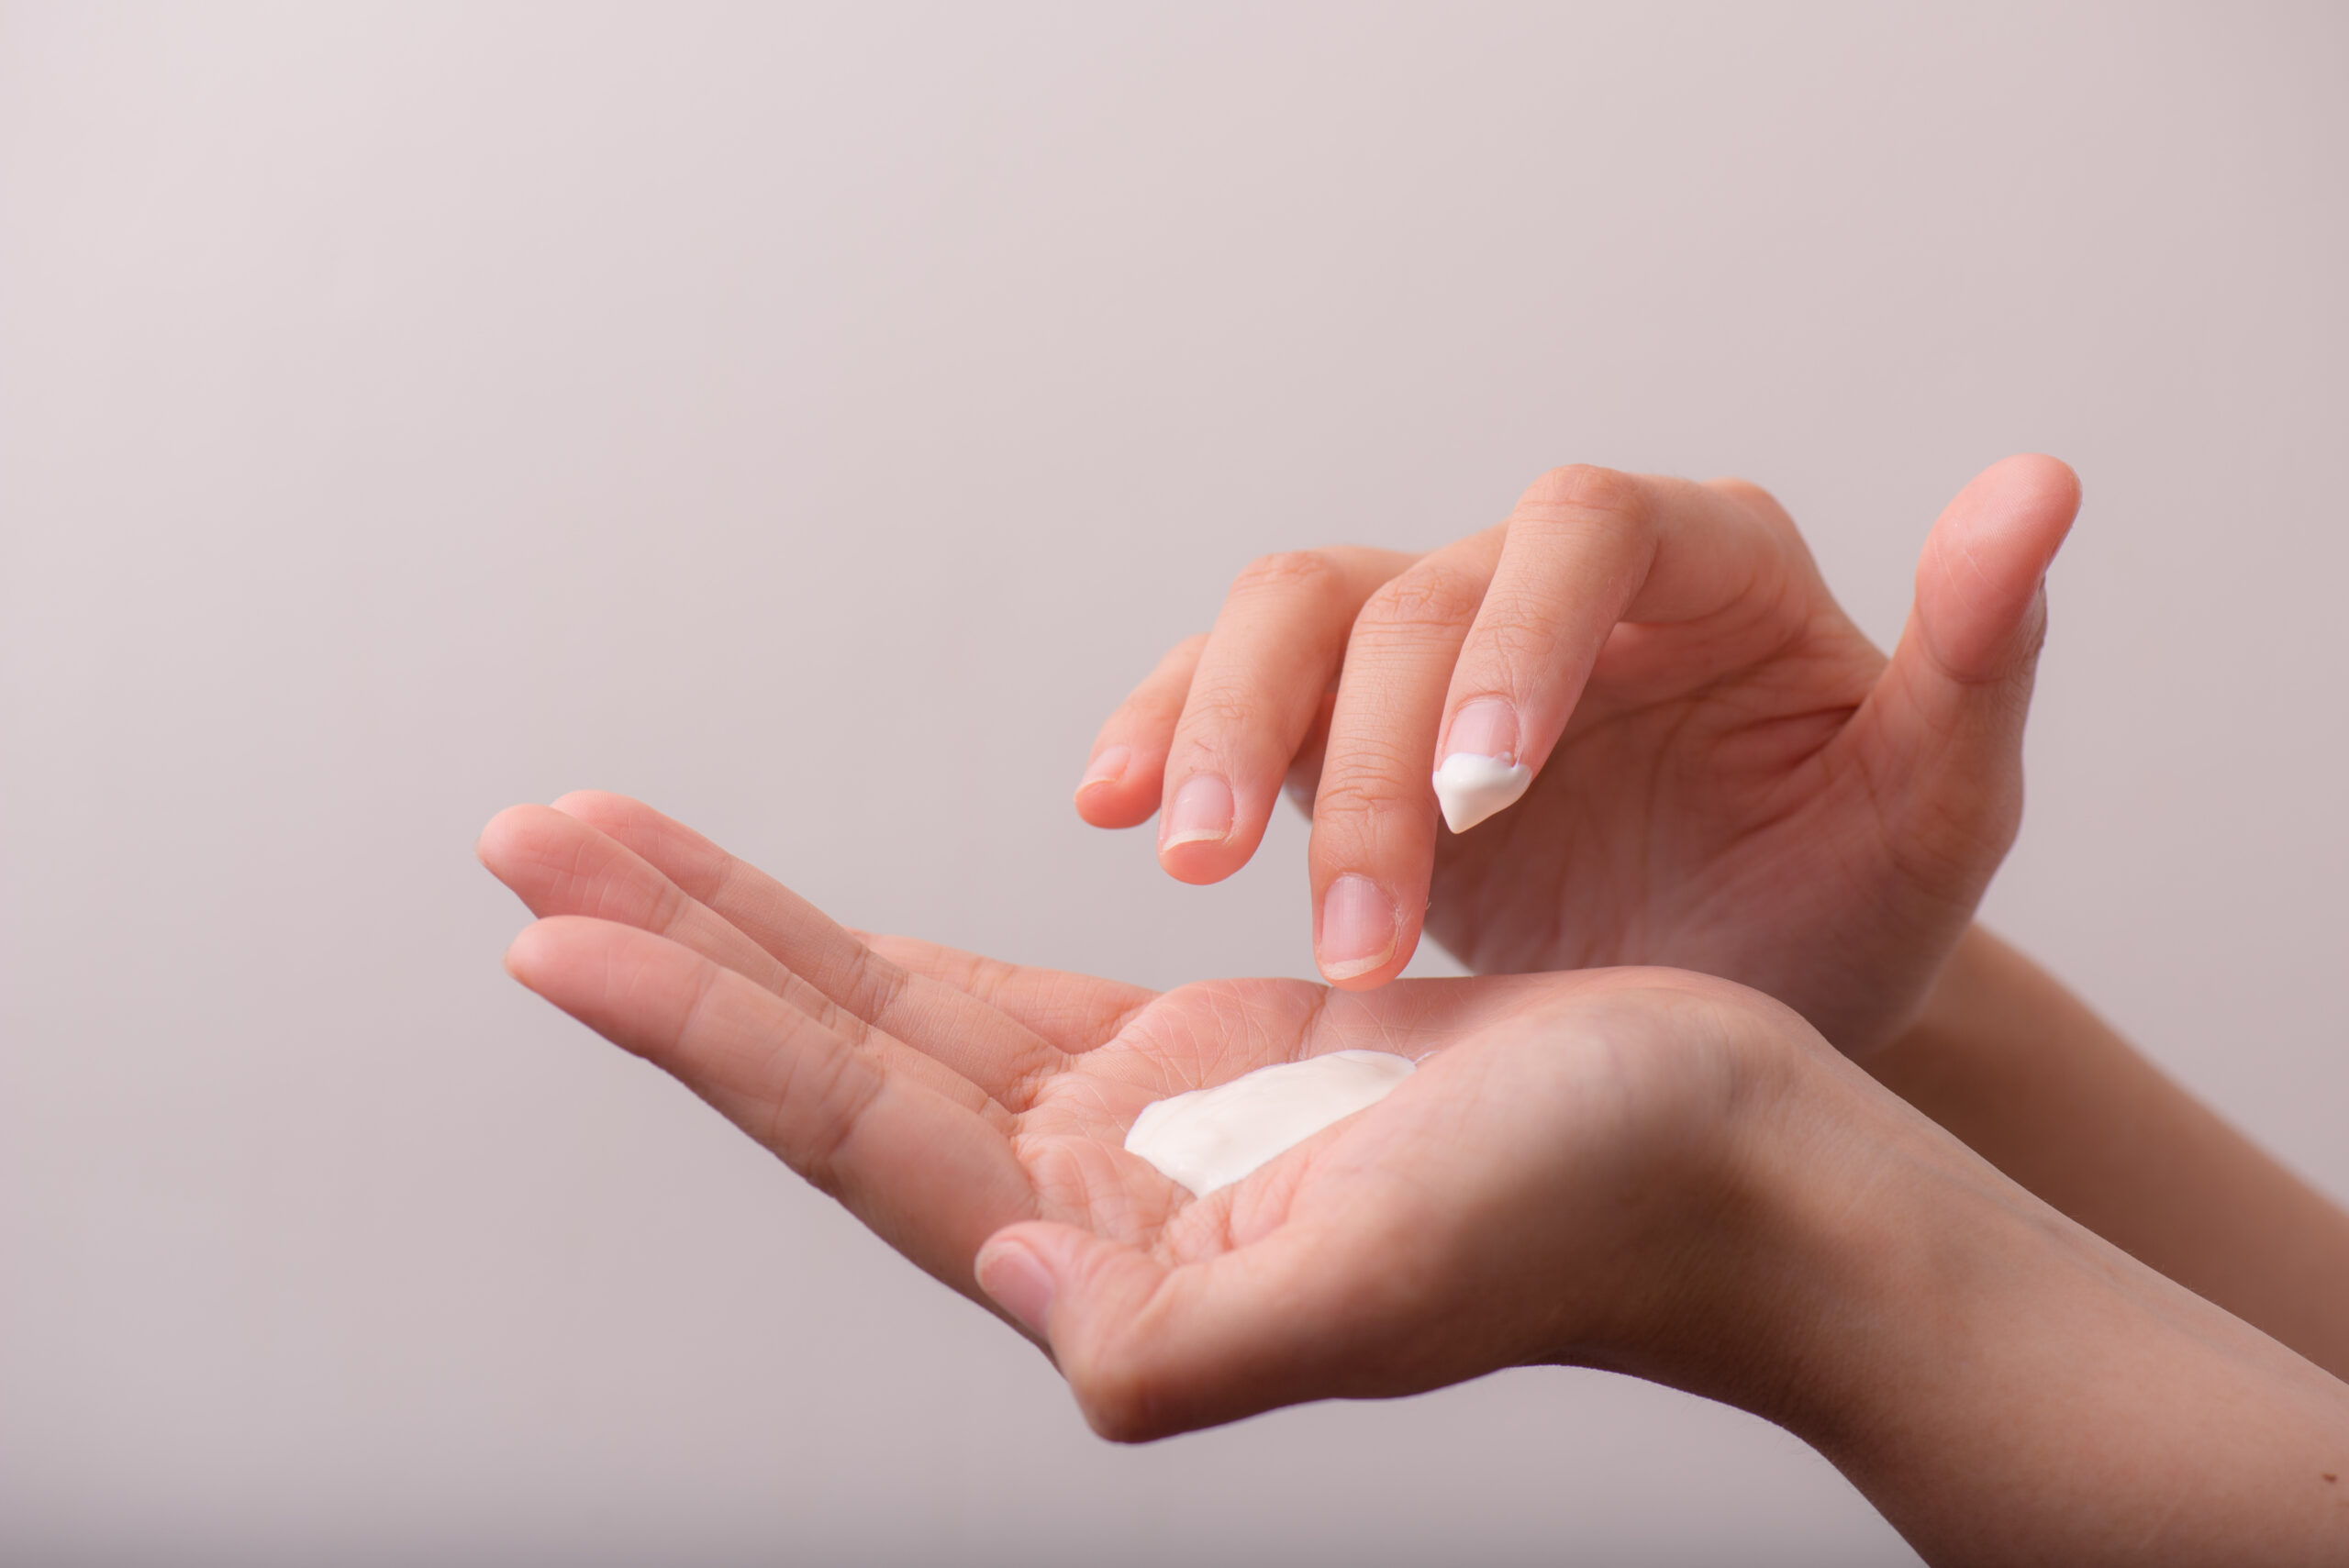 lotion on hands for OCD skin picking